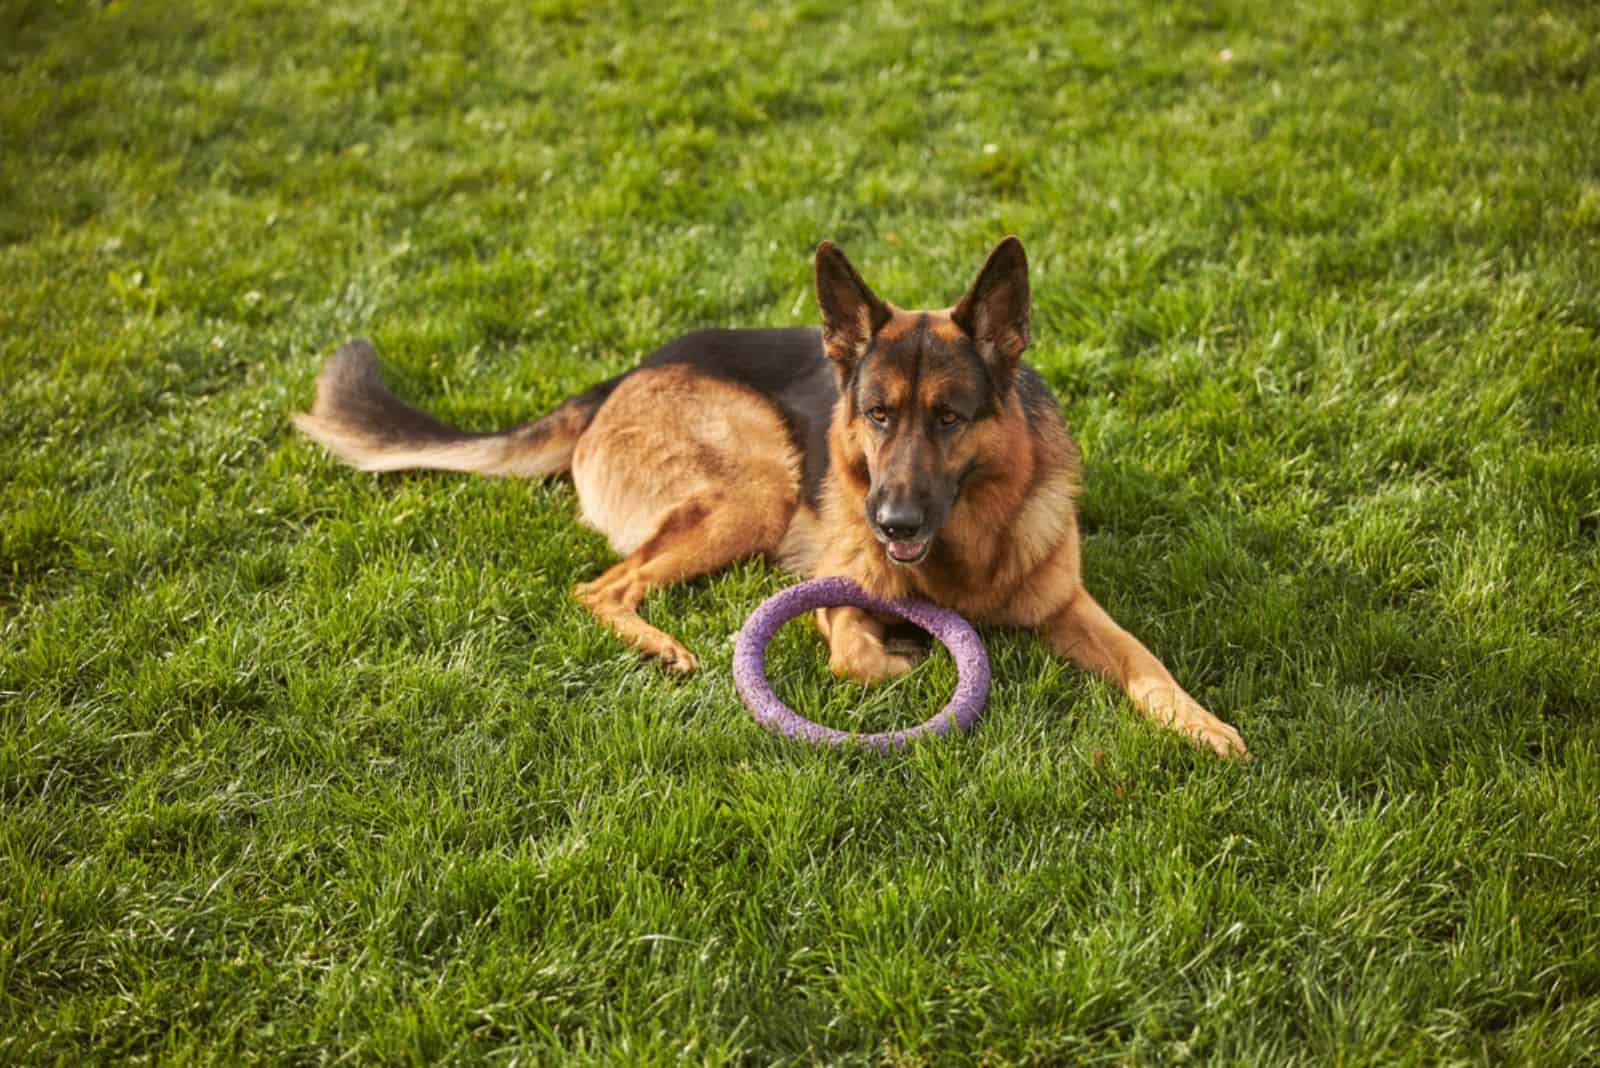 Top view of dog with toy lying on the grass in the park